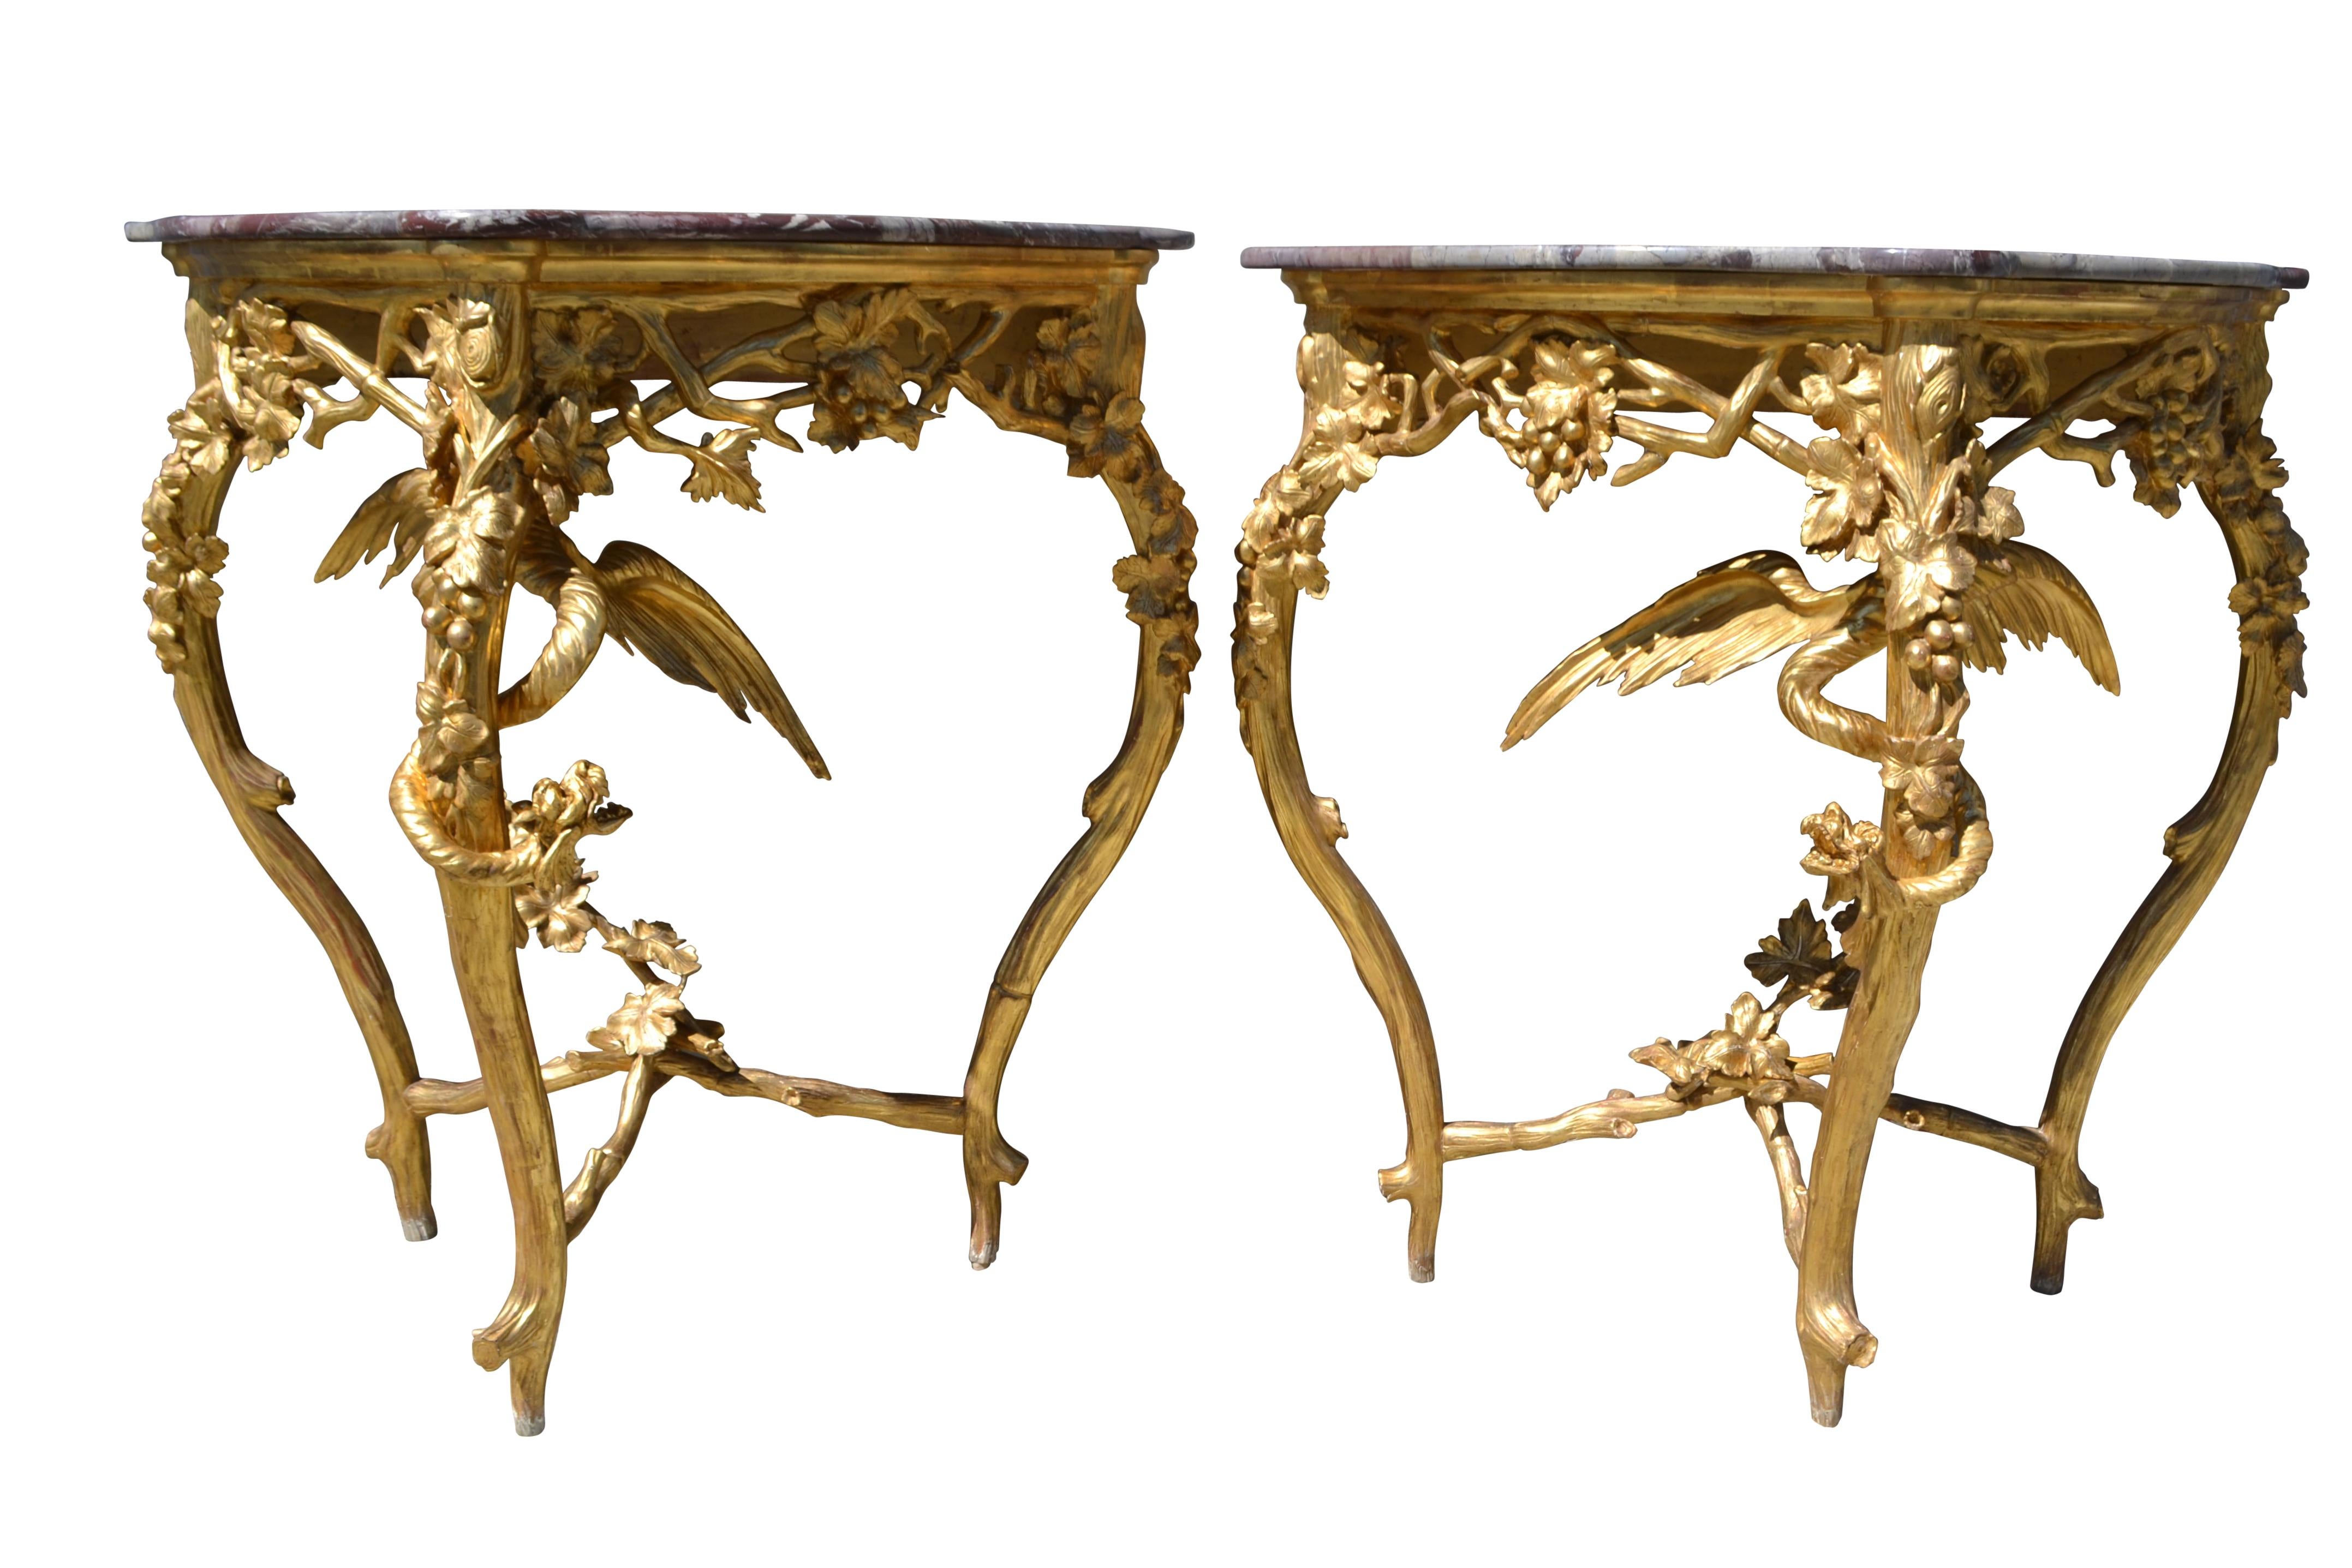 Gilt Pair of Venetian 18th-19th Century Rococo Dragon and Bird Mirrors and Consoles For Sale